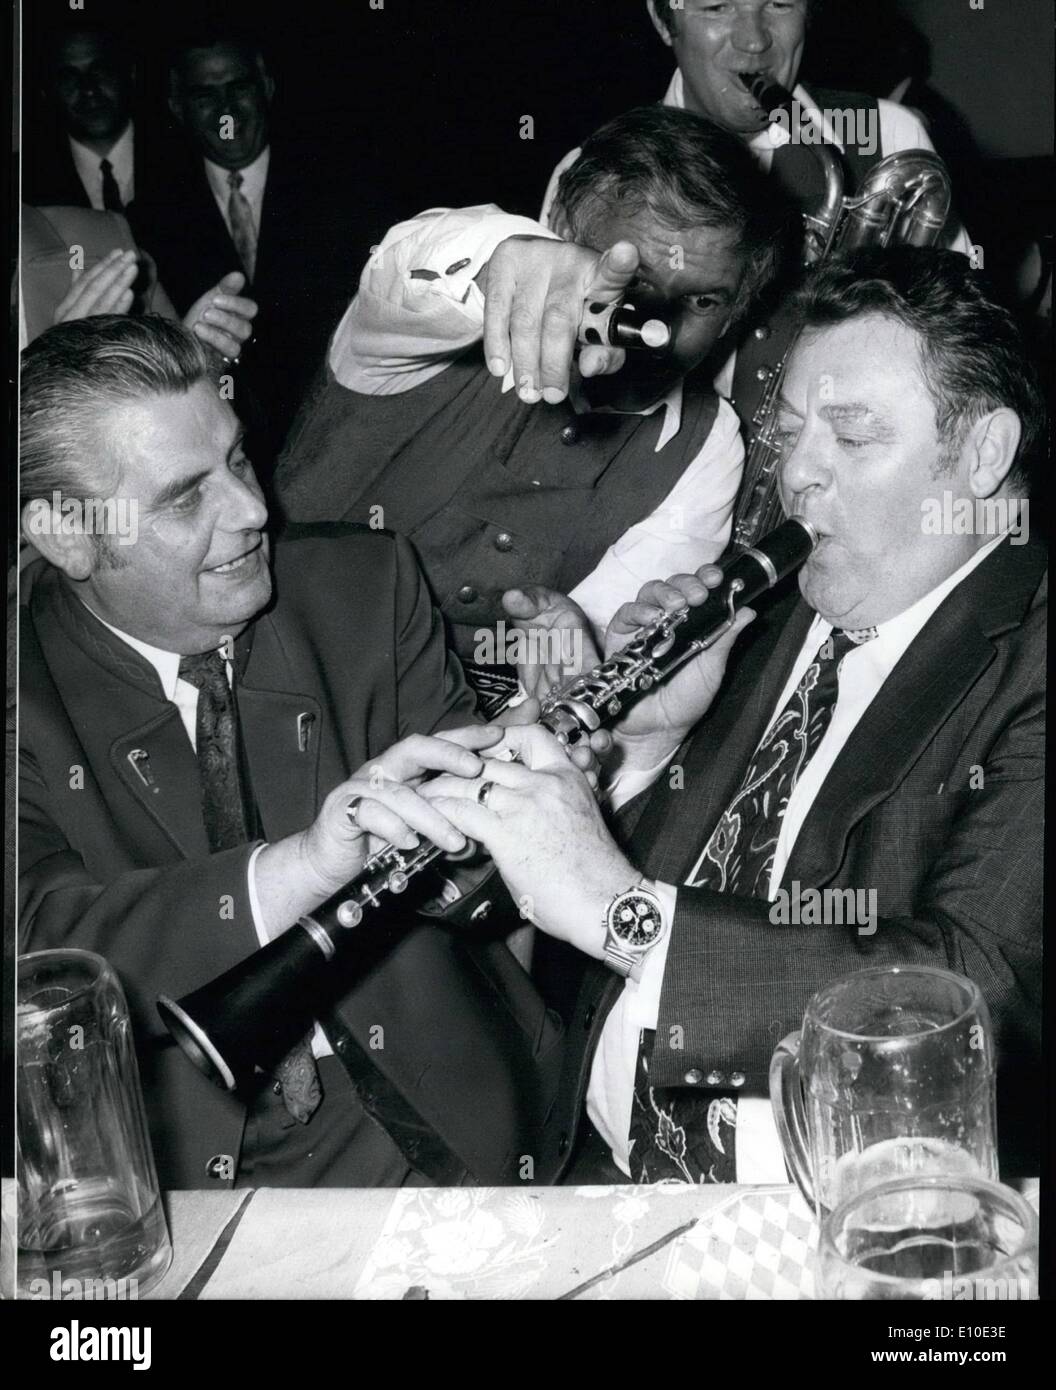 May 05, 1972 - Franz Josef Strauss: Chairman of the Christian Social Union in west Germany dropped in at the famous beer hall ''Hofbr&auml;uhaus'' in Munich Last night, where he was taught how to play the Clarinet. Critically watched by the band and his party friend George Loibl(left). he made a few tries and even managed to get some notes cut of the instrument. Stock Photo